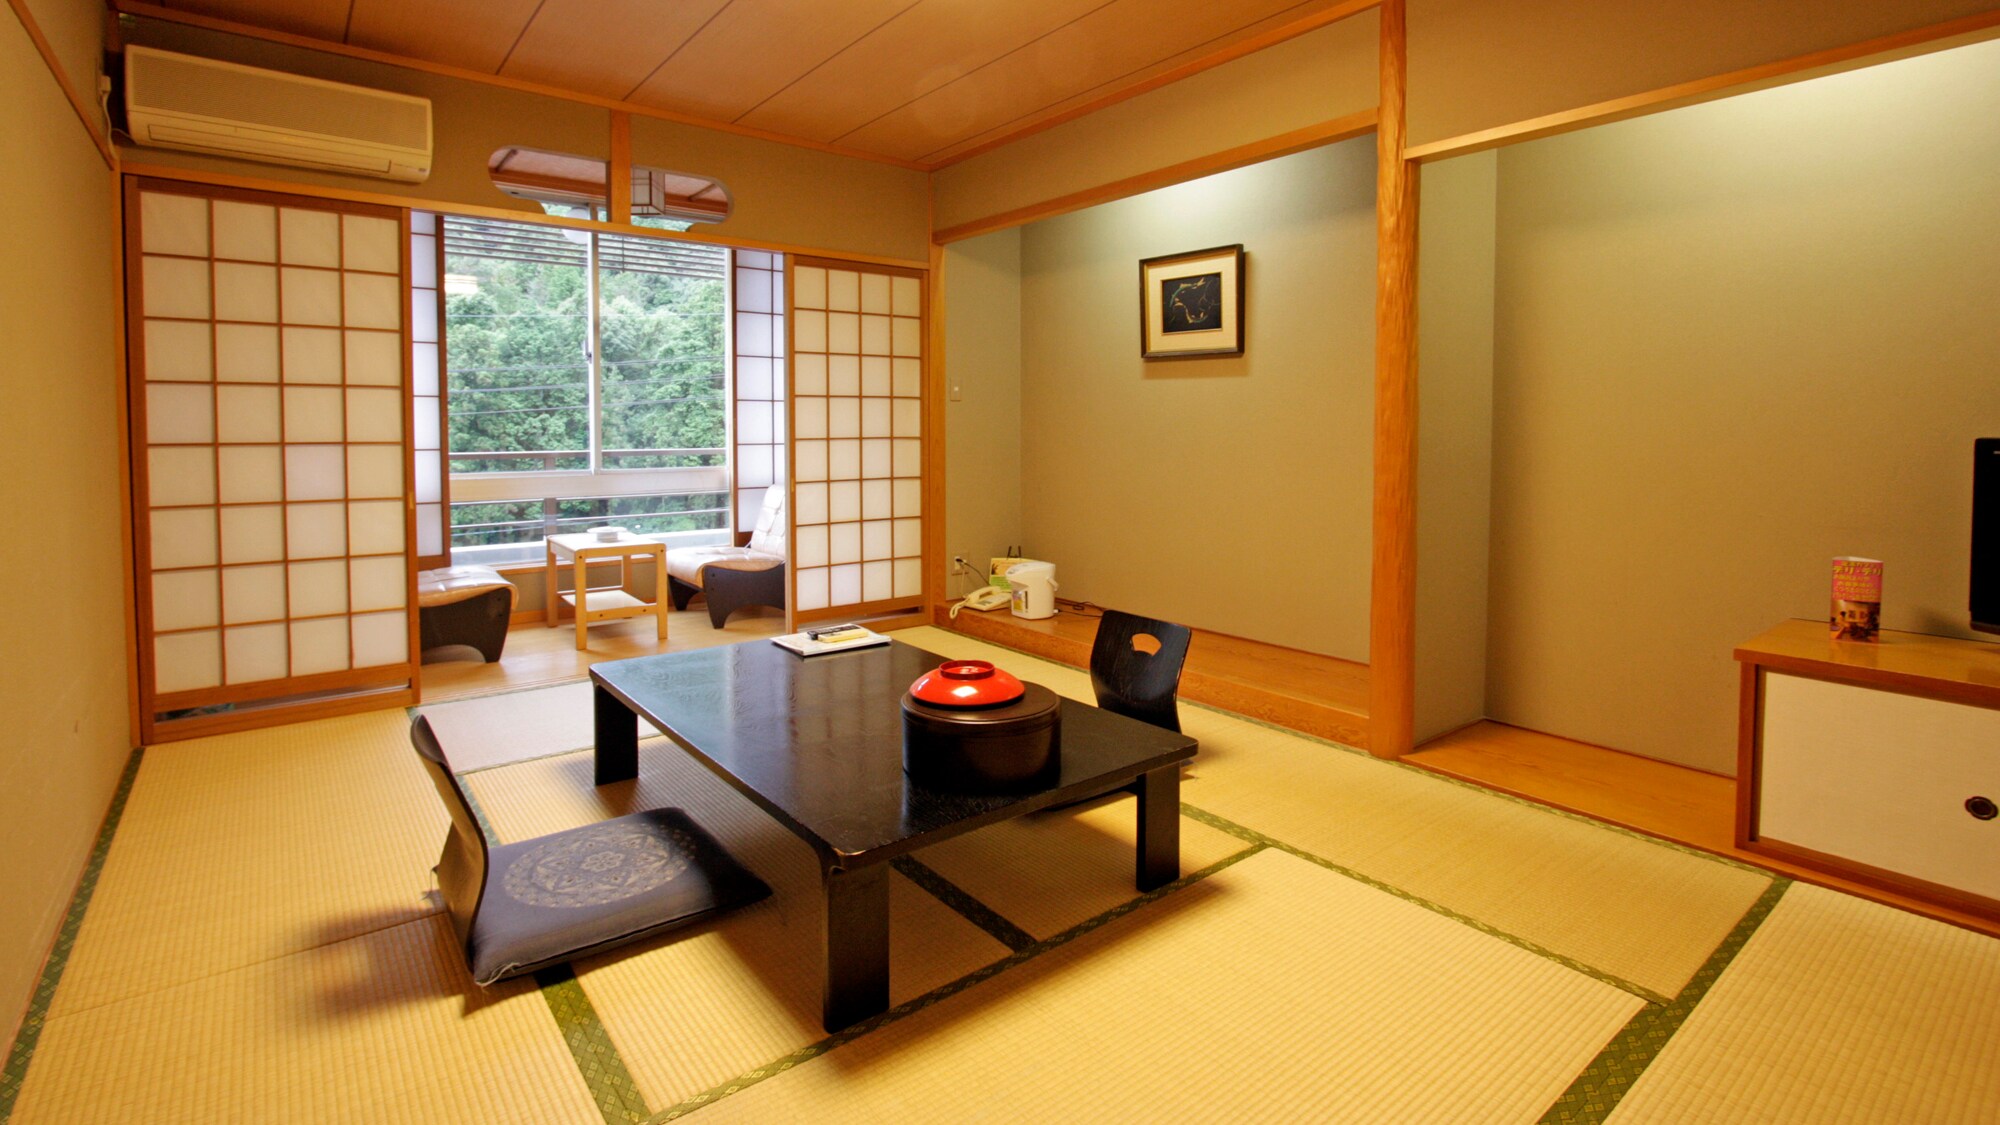 "Main building" Japanese-style room 10 tatami mats (without bus)